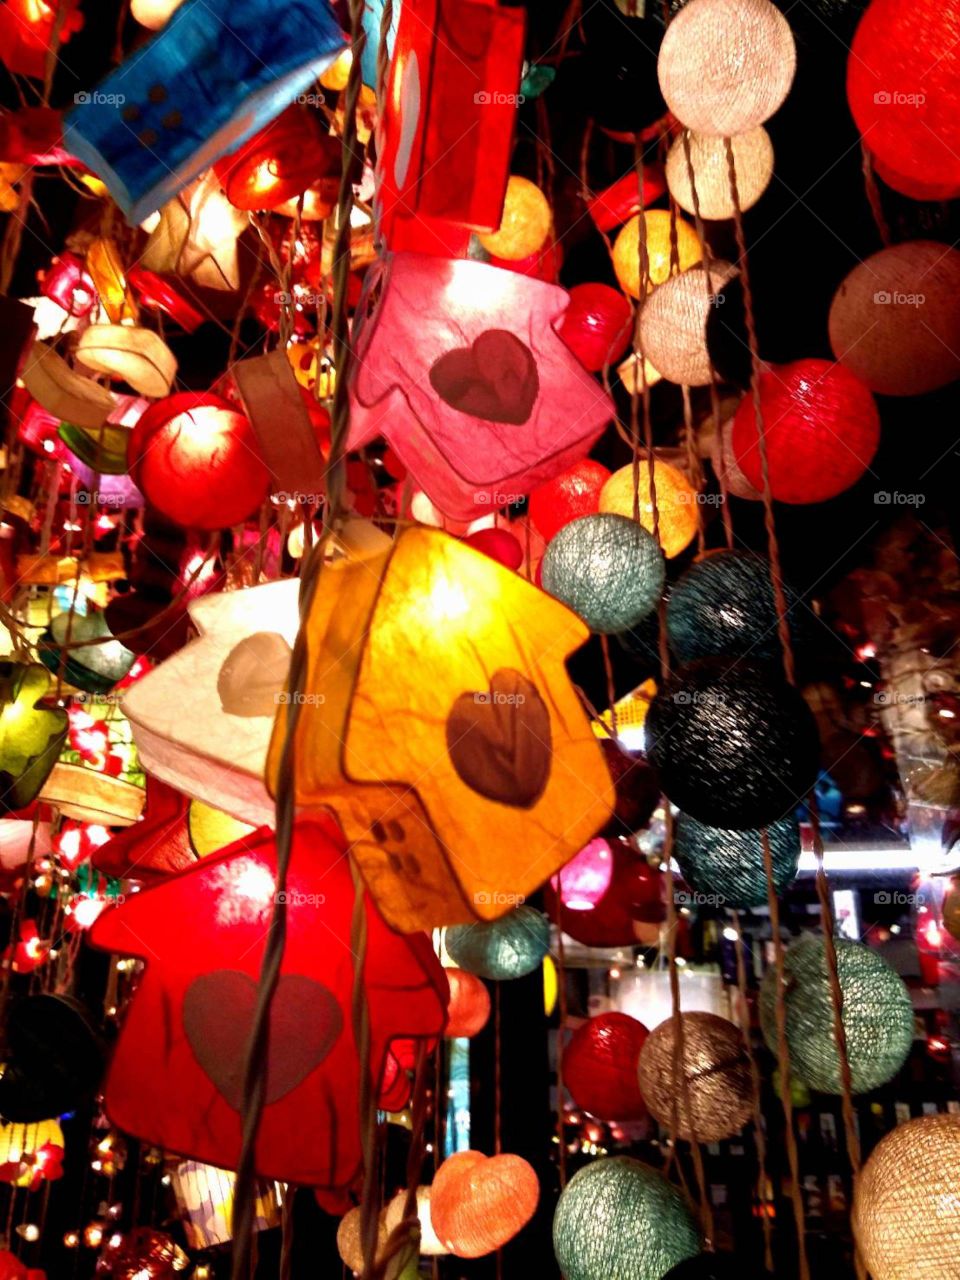 Home with heart lights in JK market, Thailand.